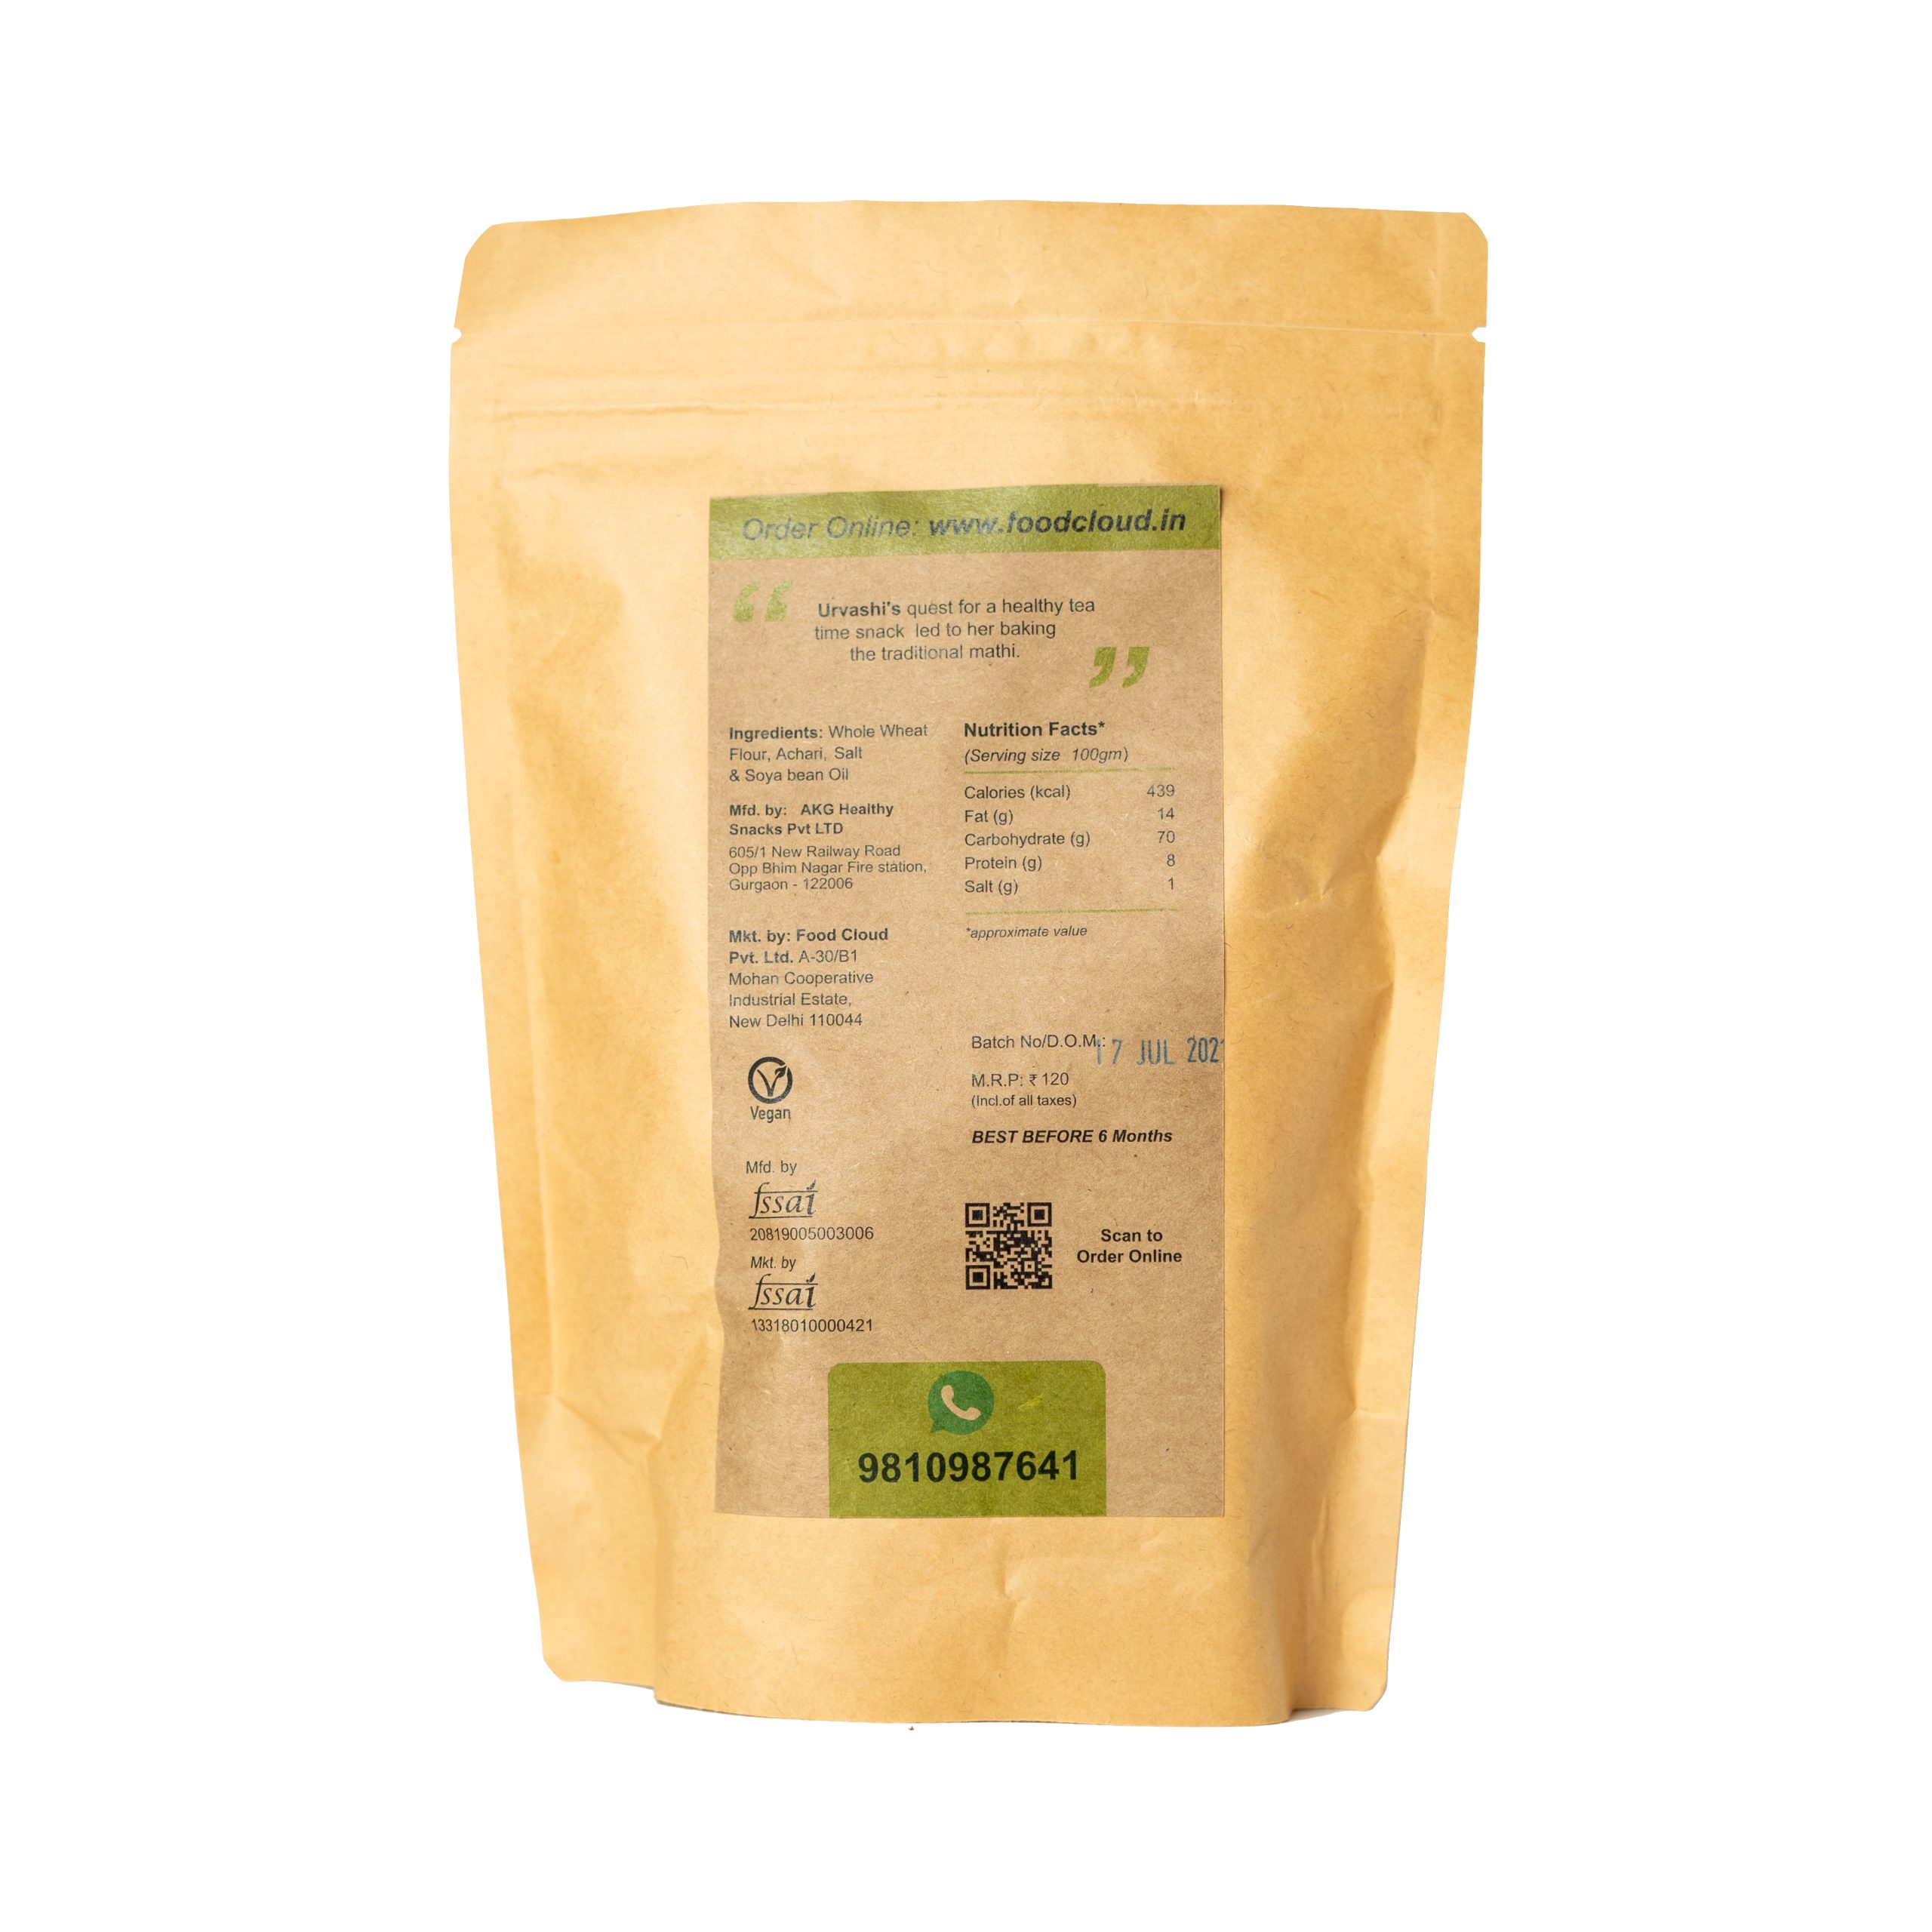 Product: FoodCloud Baked Achari Mathi (Pack of 3)